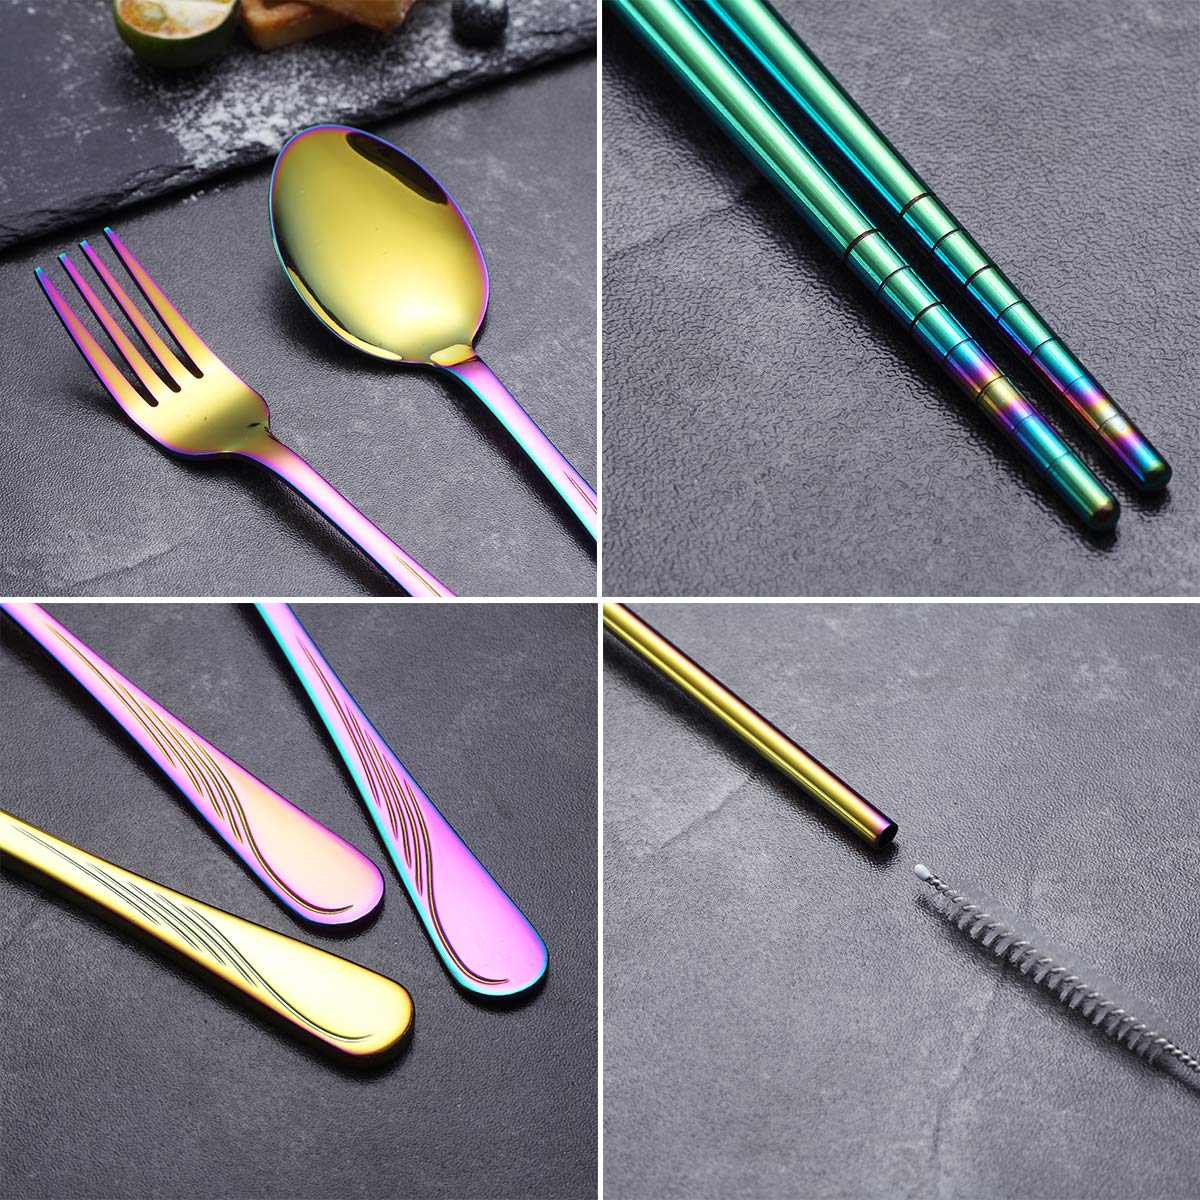 HOMQUEN Portable Utensils,Travel Camping Flatware Set,Stainless Steel Silverware Set,Include Knive/Fork/Spoon/Chopsticks/Straws/Brush/Portable Case(Colorful-8 Piece)